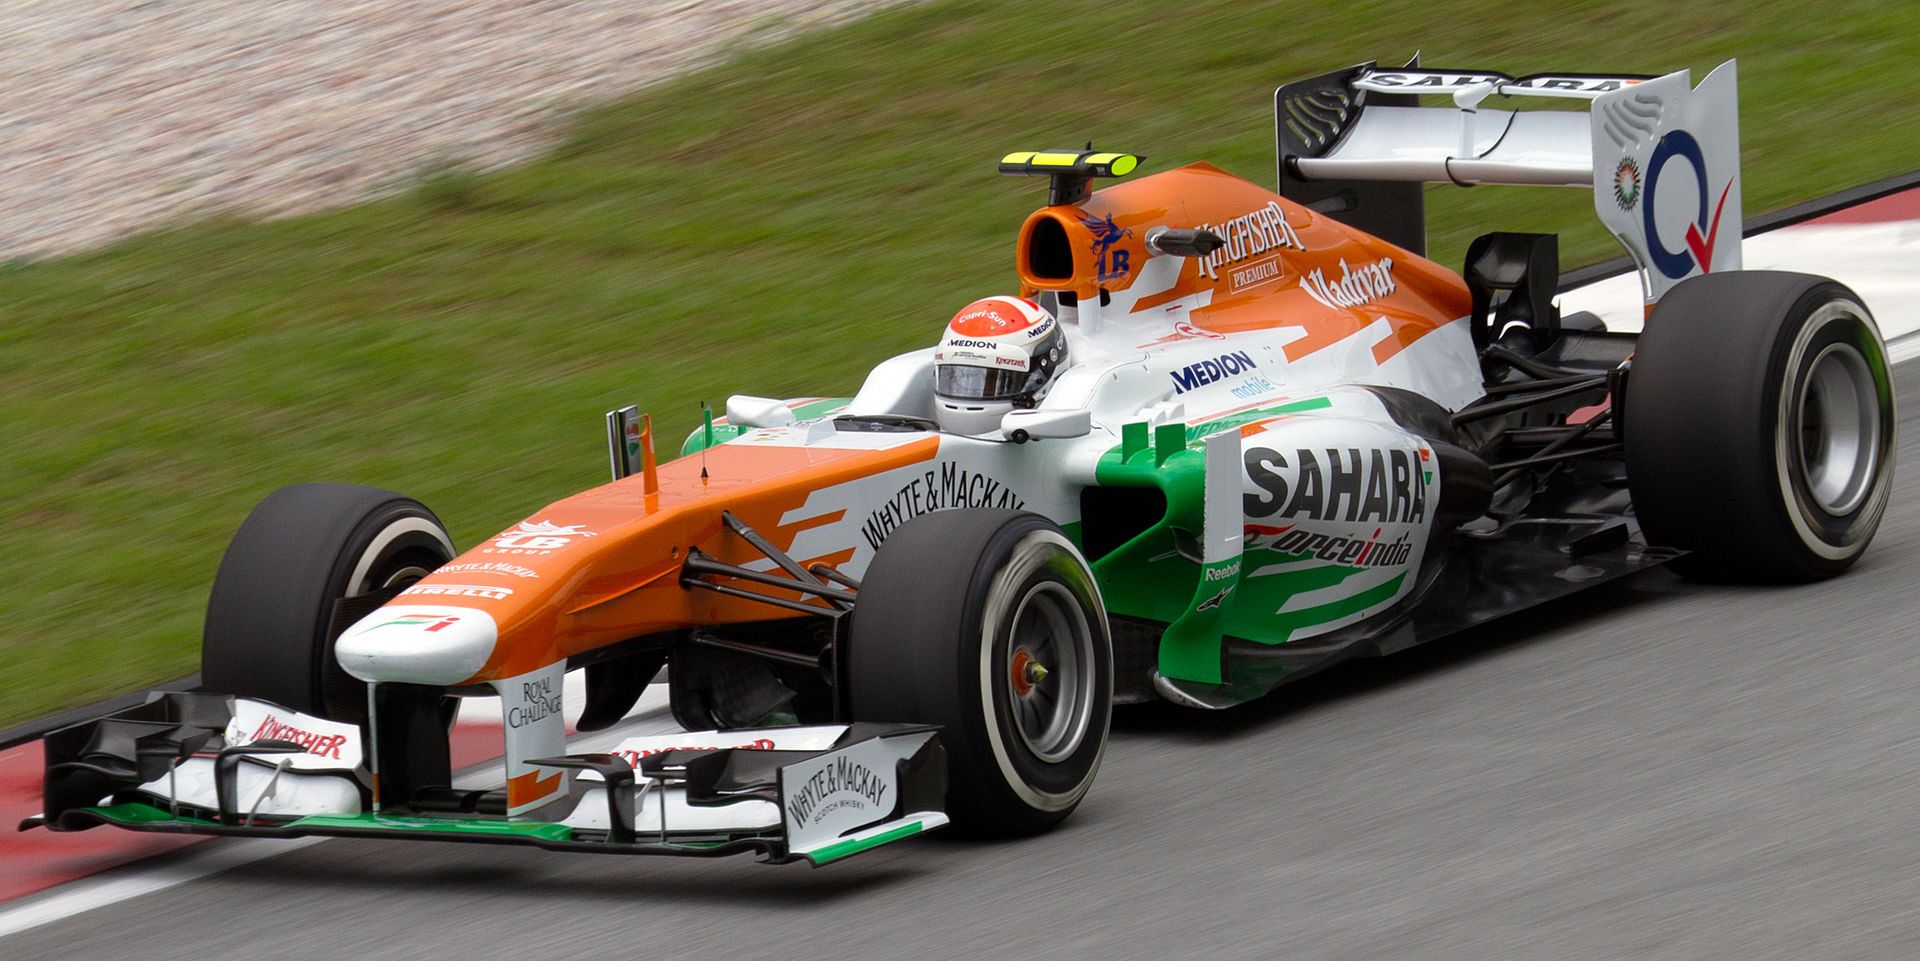 Force India Vjm06 Wallpapers